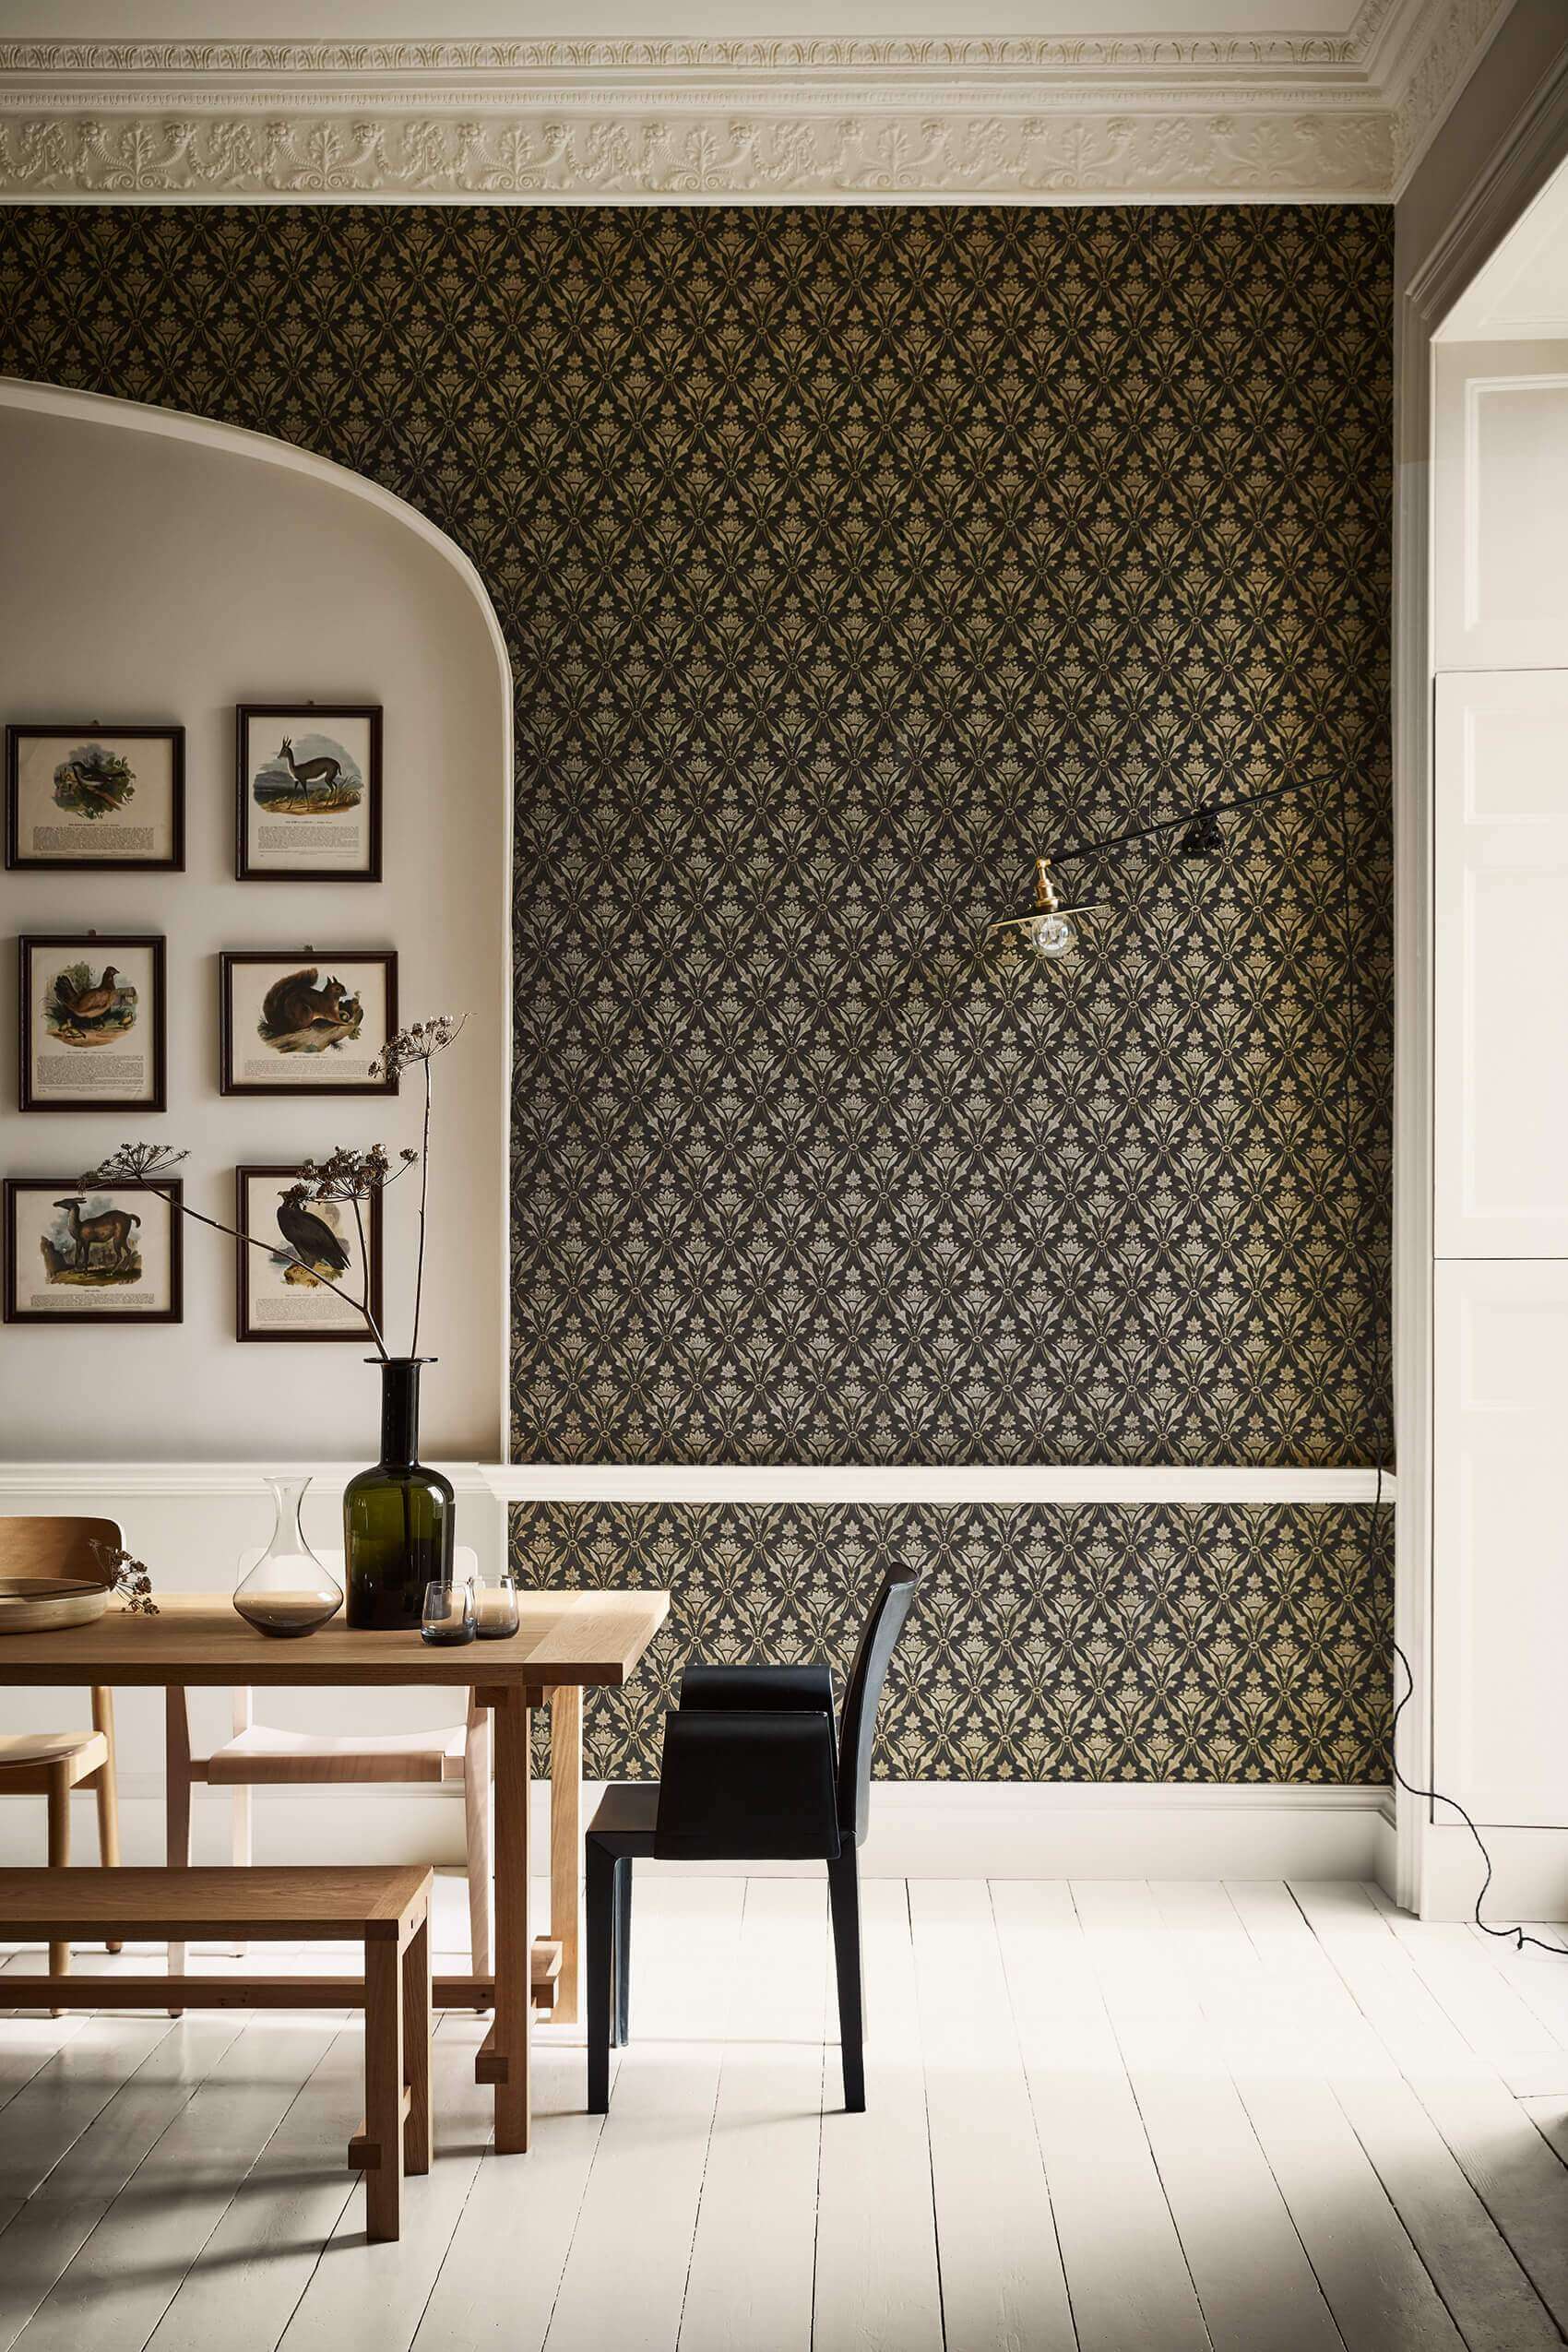 Little Greene Wallpaper Borough High St. Stamp - escapologyhome.co.uk